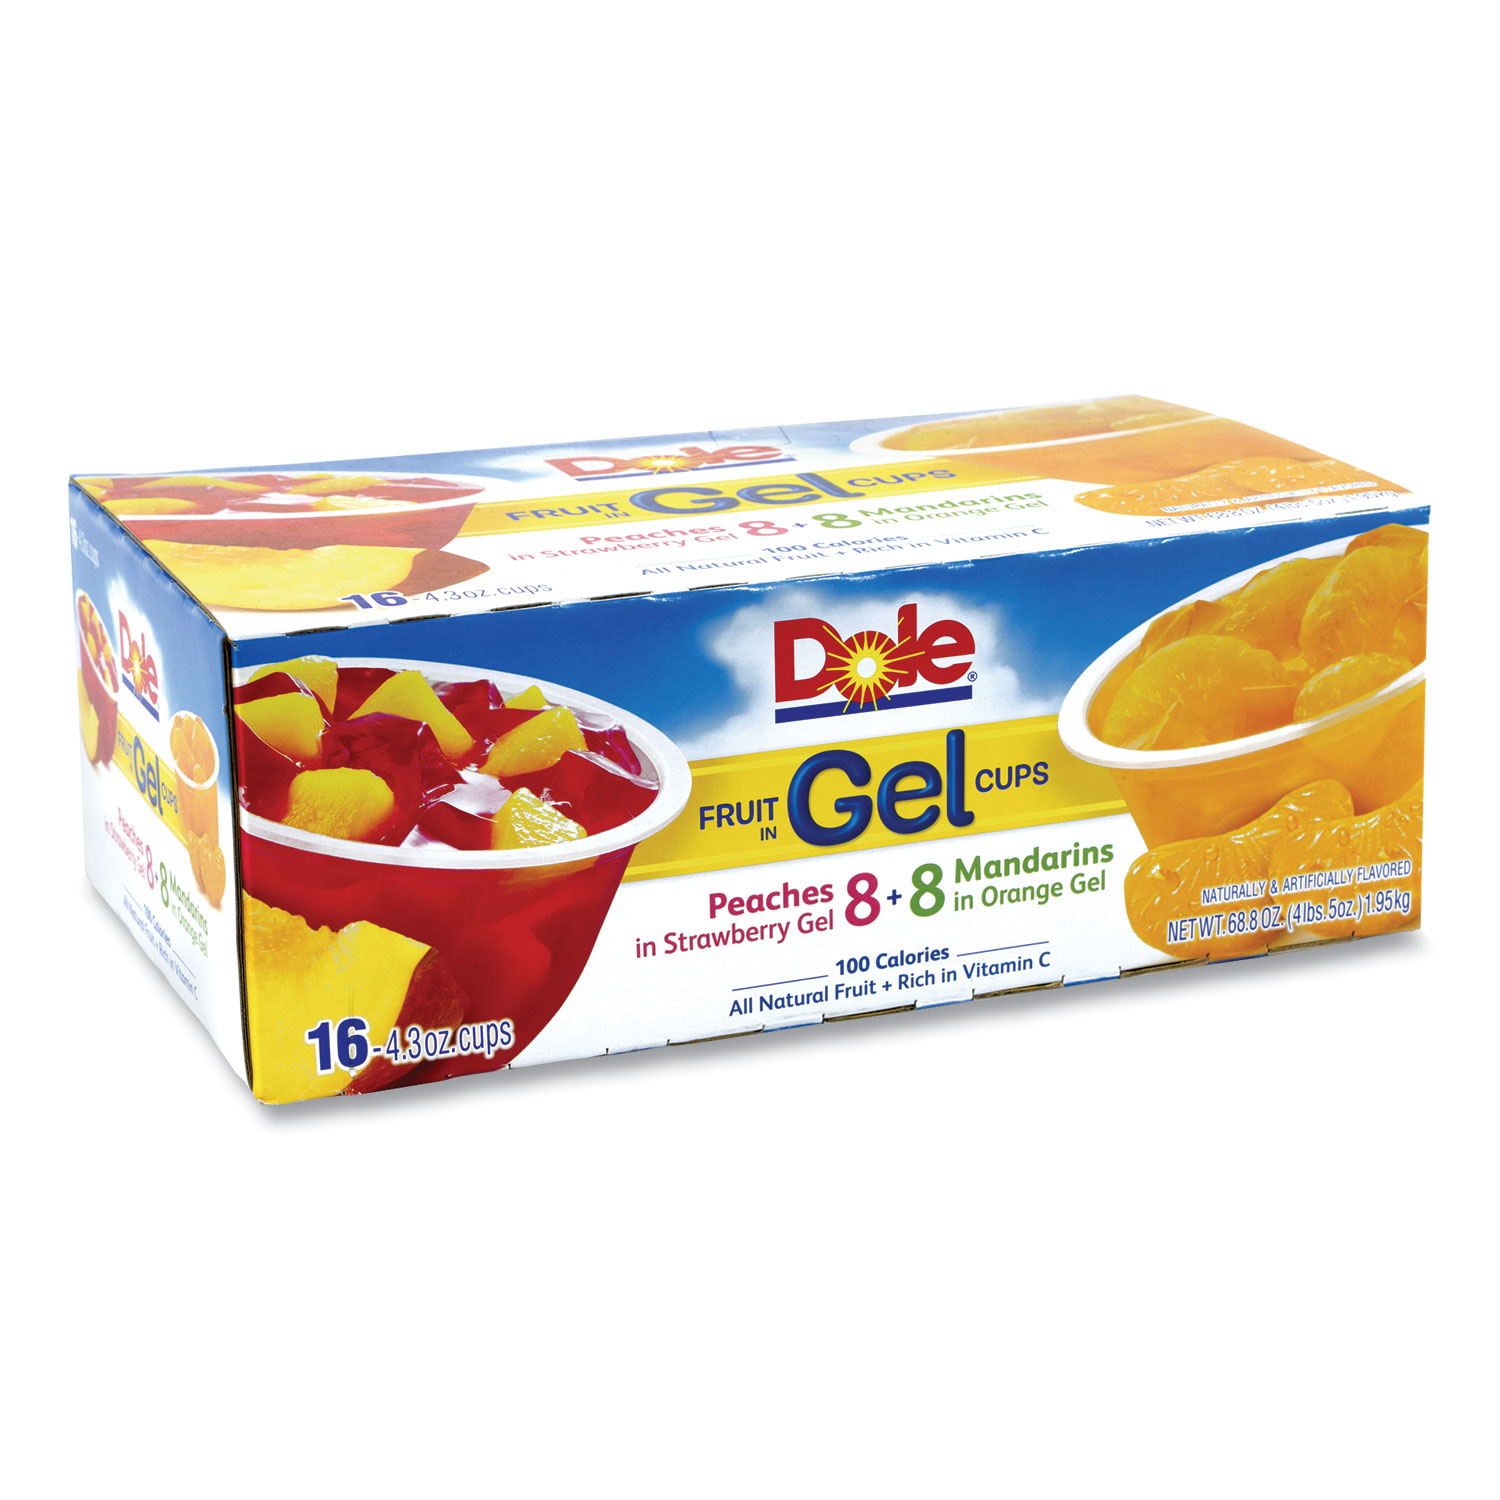  Dole 24824 Fruit in Gel Cups, Mandarins/Orange, Peaches/Strawberry, 4.3 oz Cups, 16 Cups/Carton, Free Delivery in 1-4 Business Days (GRR22000473) 